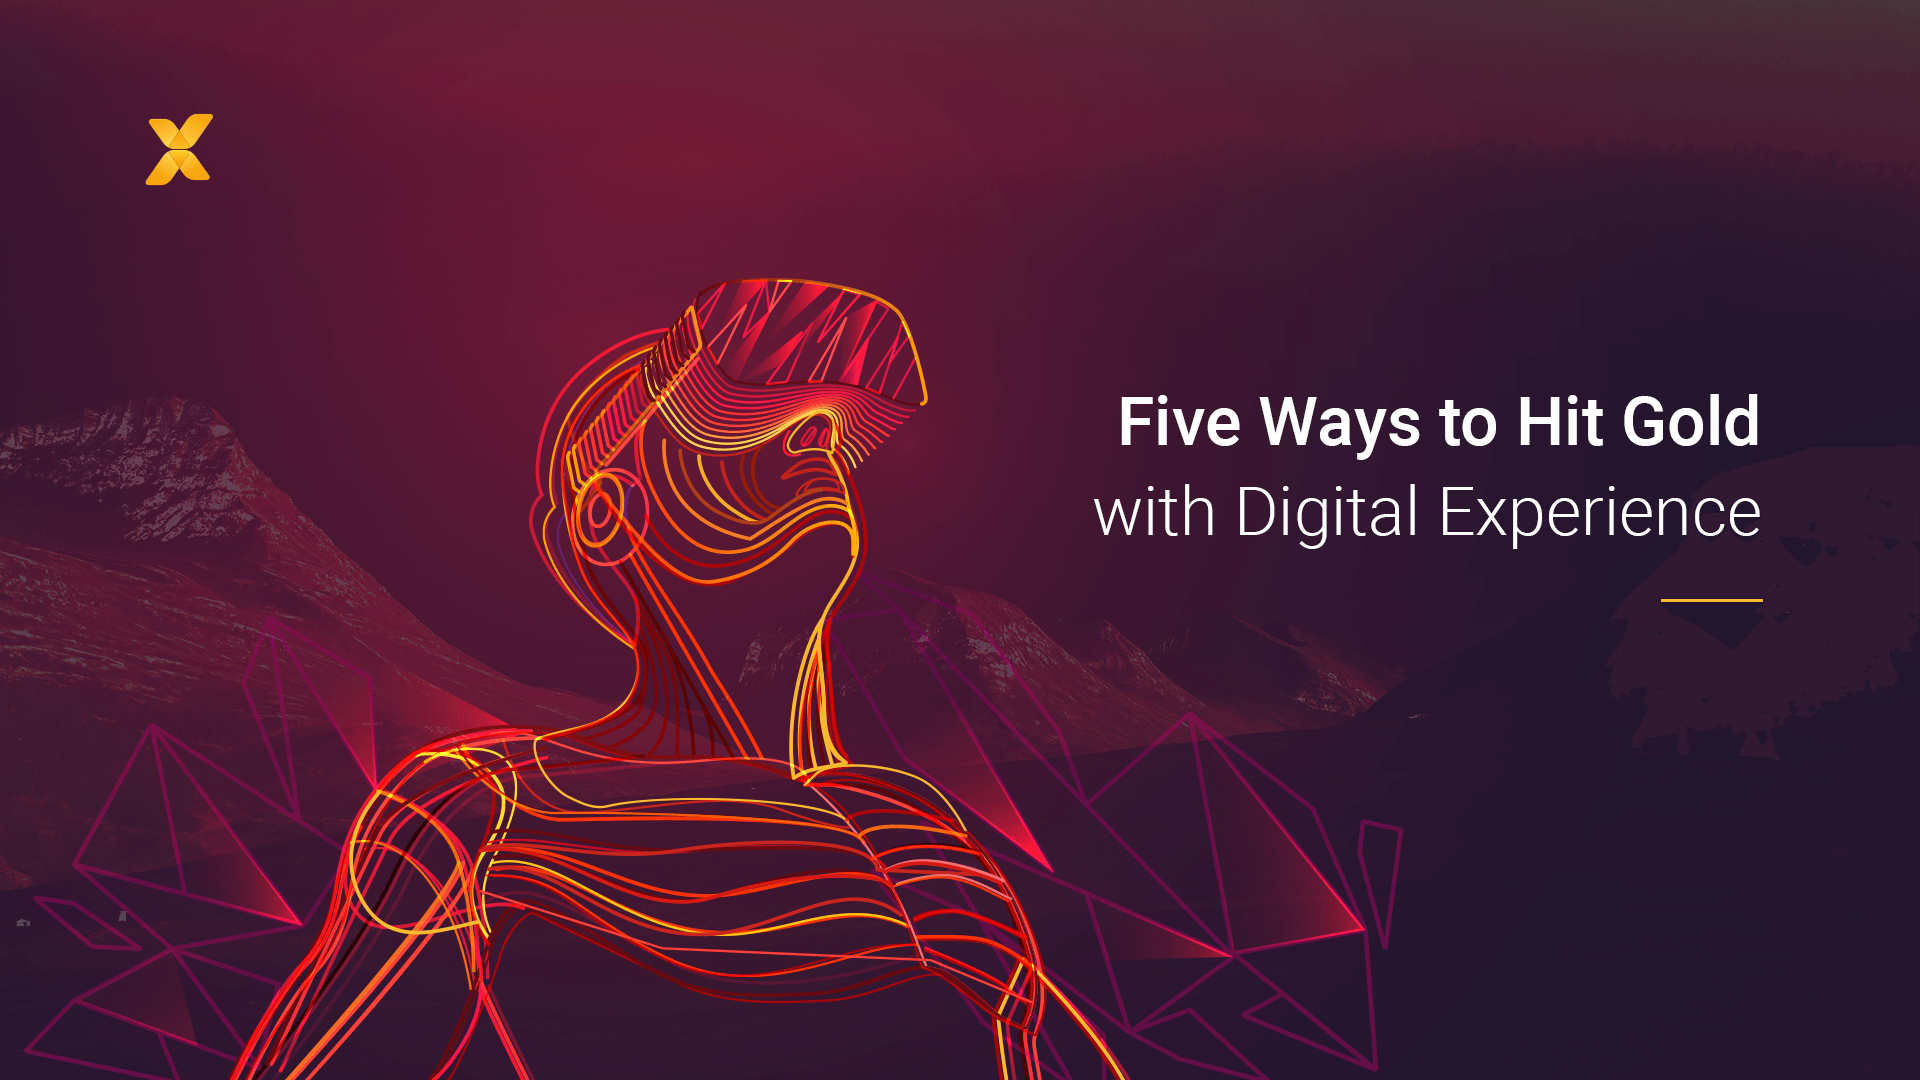 Abstract image by Vaimo with title "Five Ways to Hit Gold with Digital Experience."